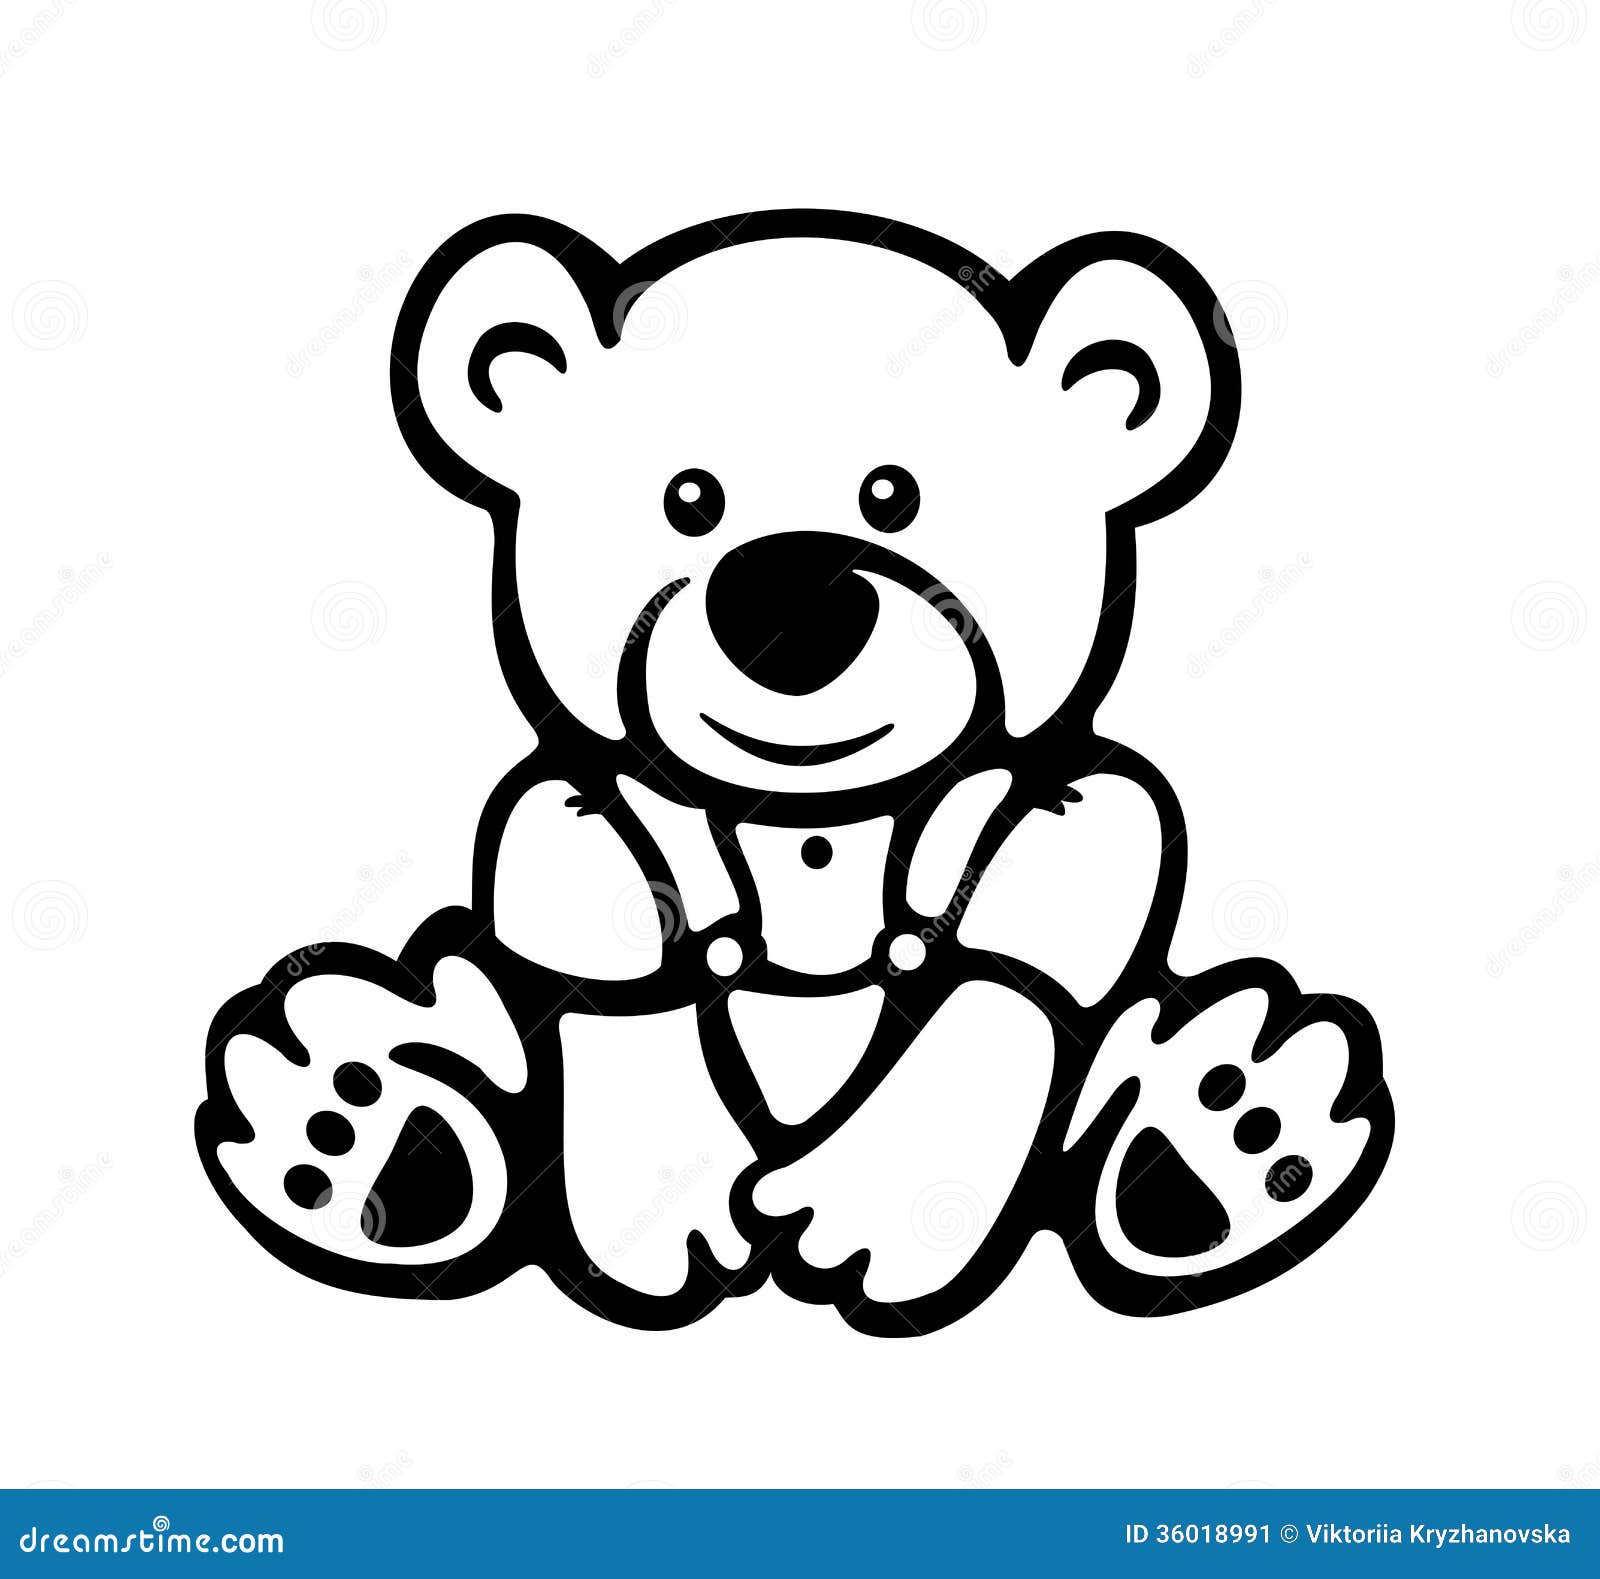 Download Vector Of Cute Baby Bear Silhouette. Stock Image - Image ...